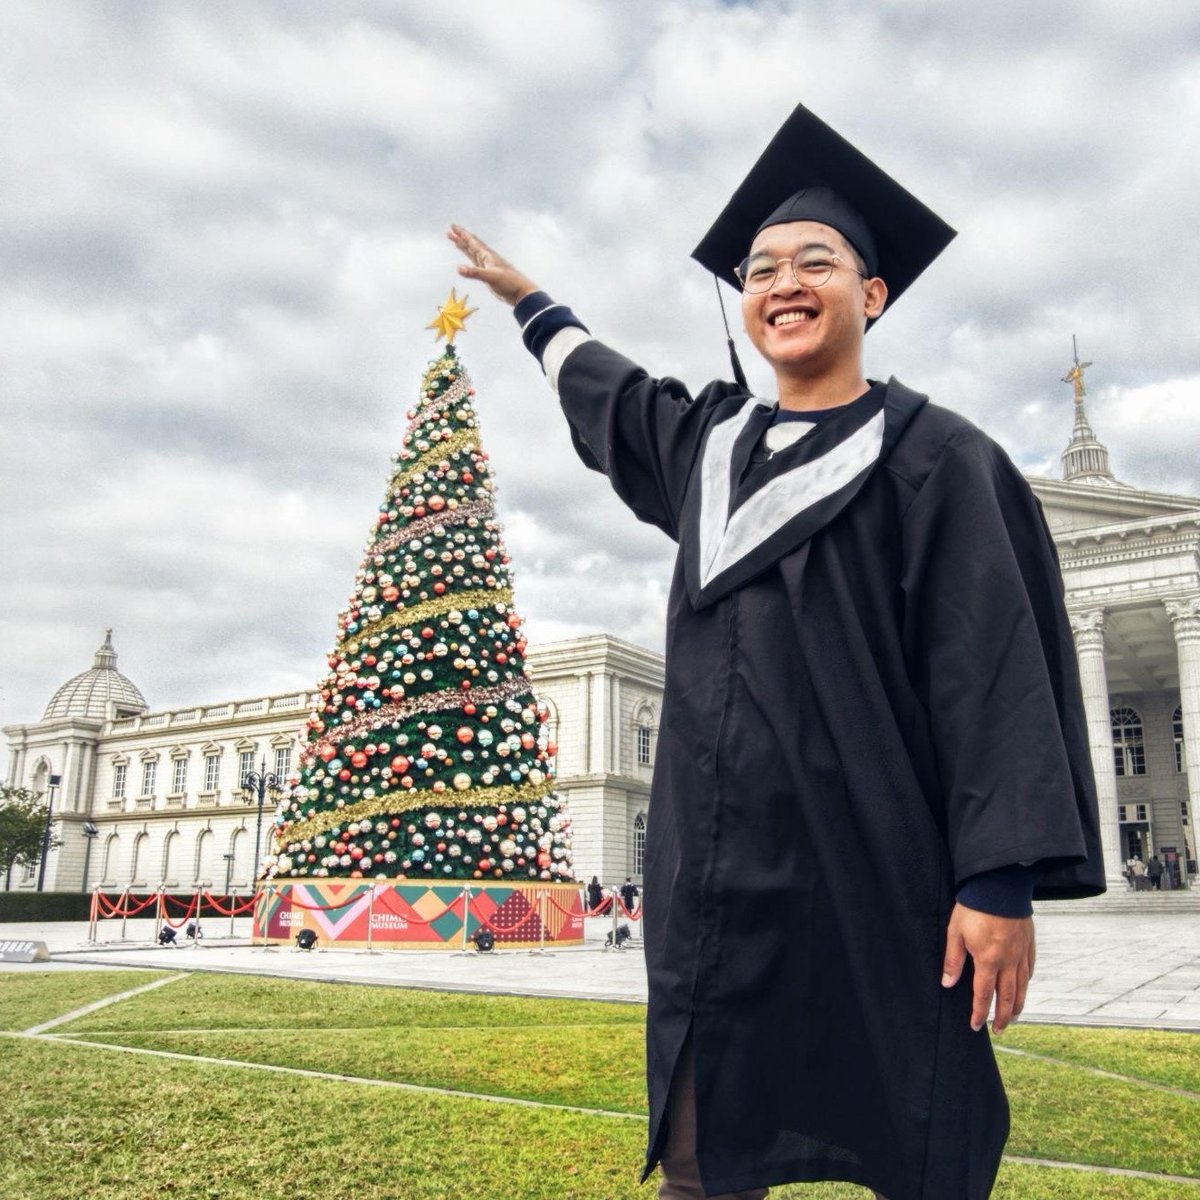 ISF’s life-changing programmes lifted Bunleng out of poverty and inspired him to give back. After graduating top of his class, he joined a Taiwanese NGO that brings education and healthcare to disadvantaged communities in Cambodia. Learn more via the link in our bio.